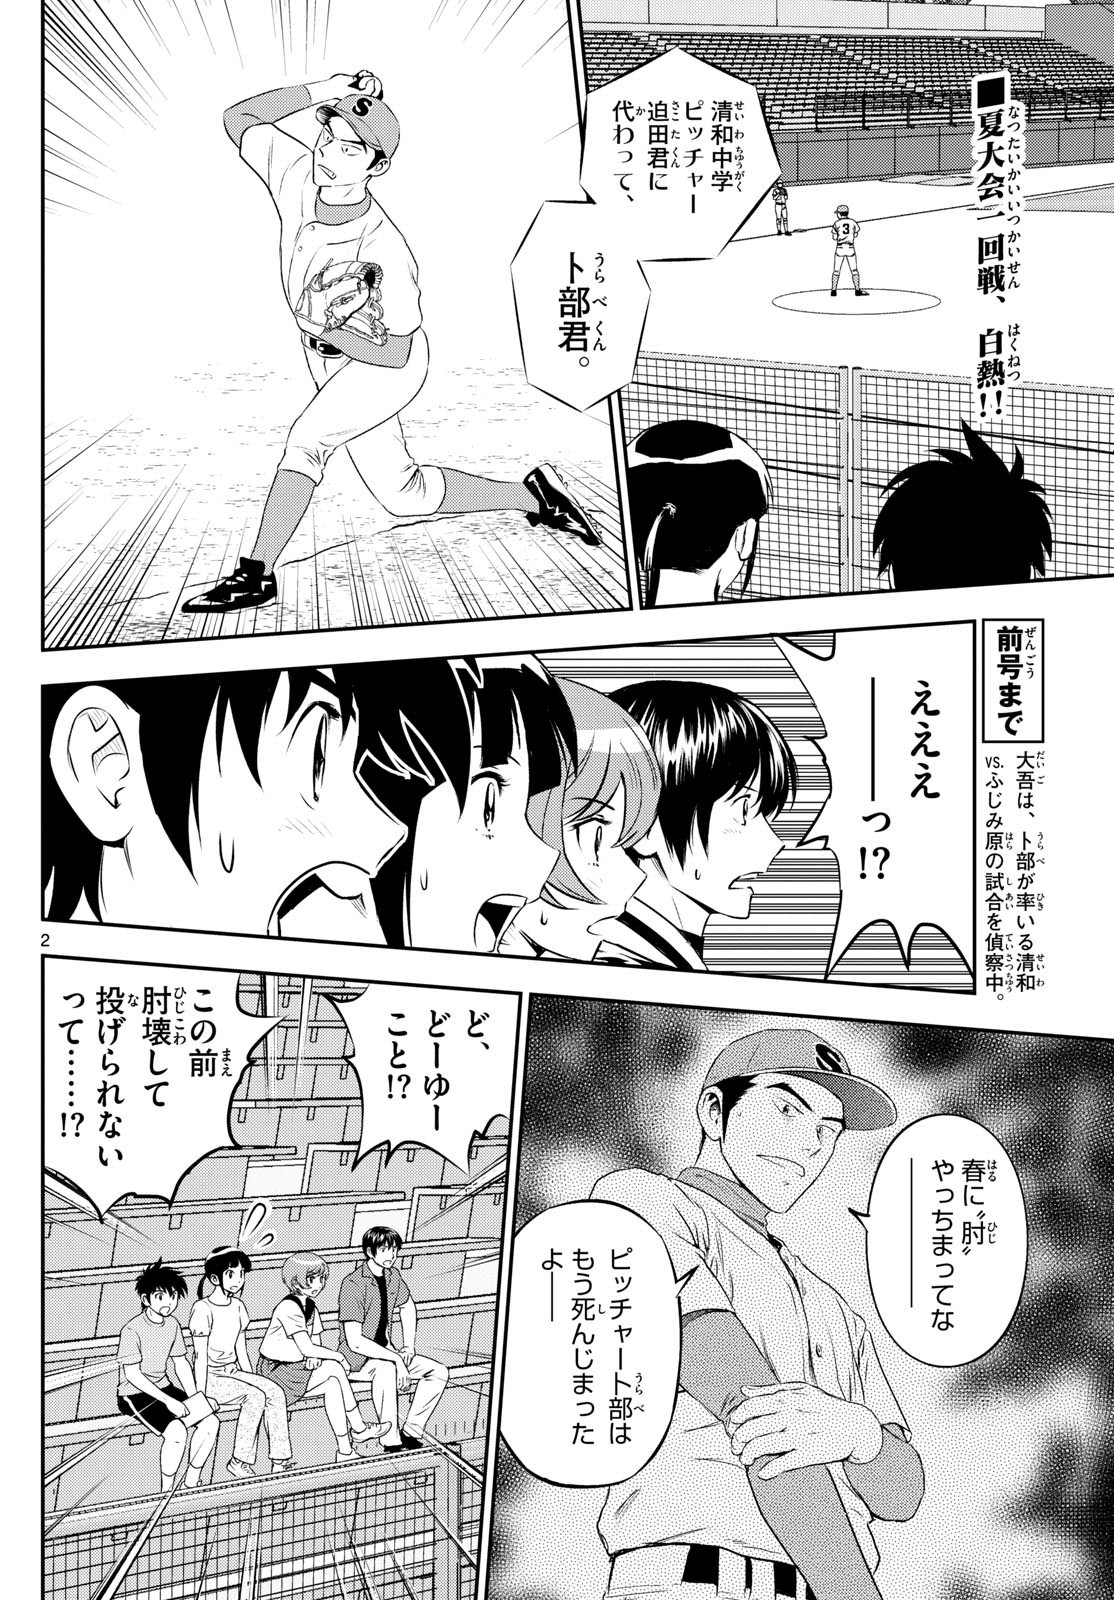 Major 2nd - メジャーセカンド - Chapter 263 - Page 2